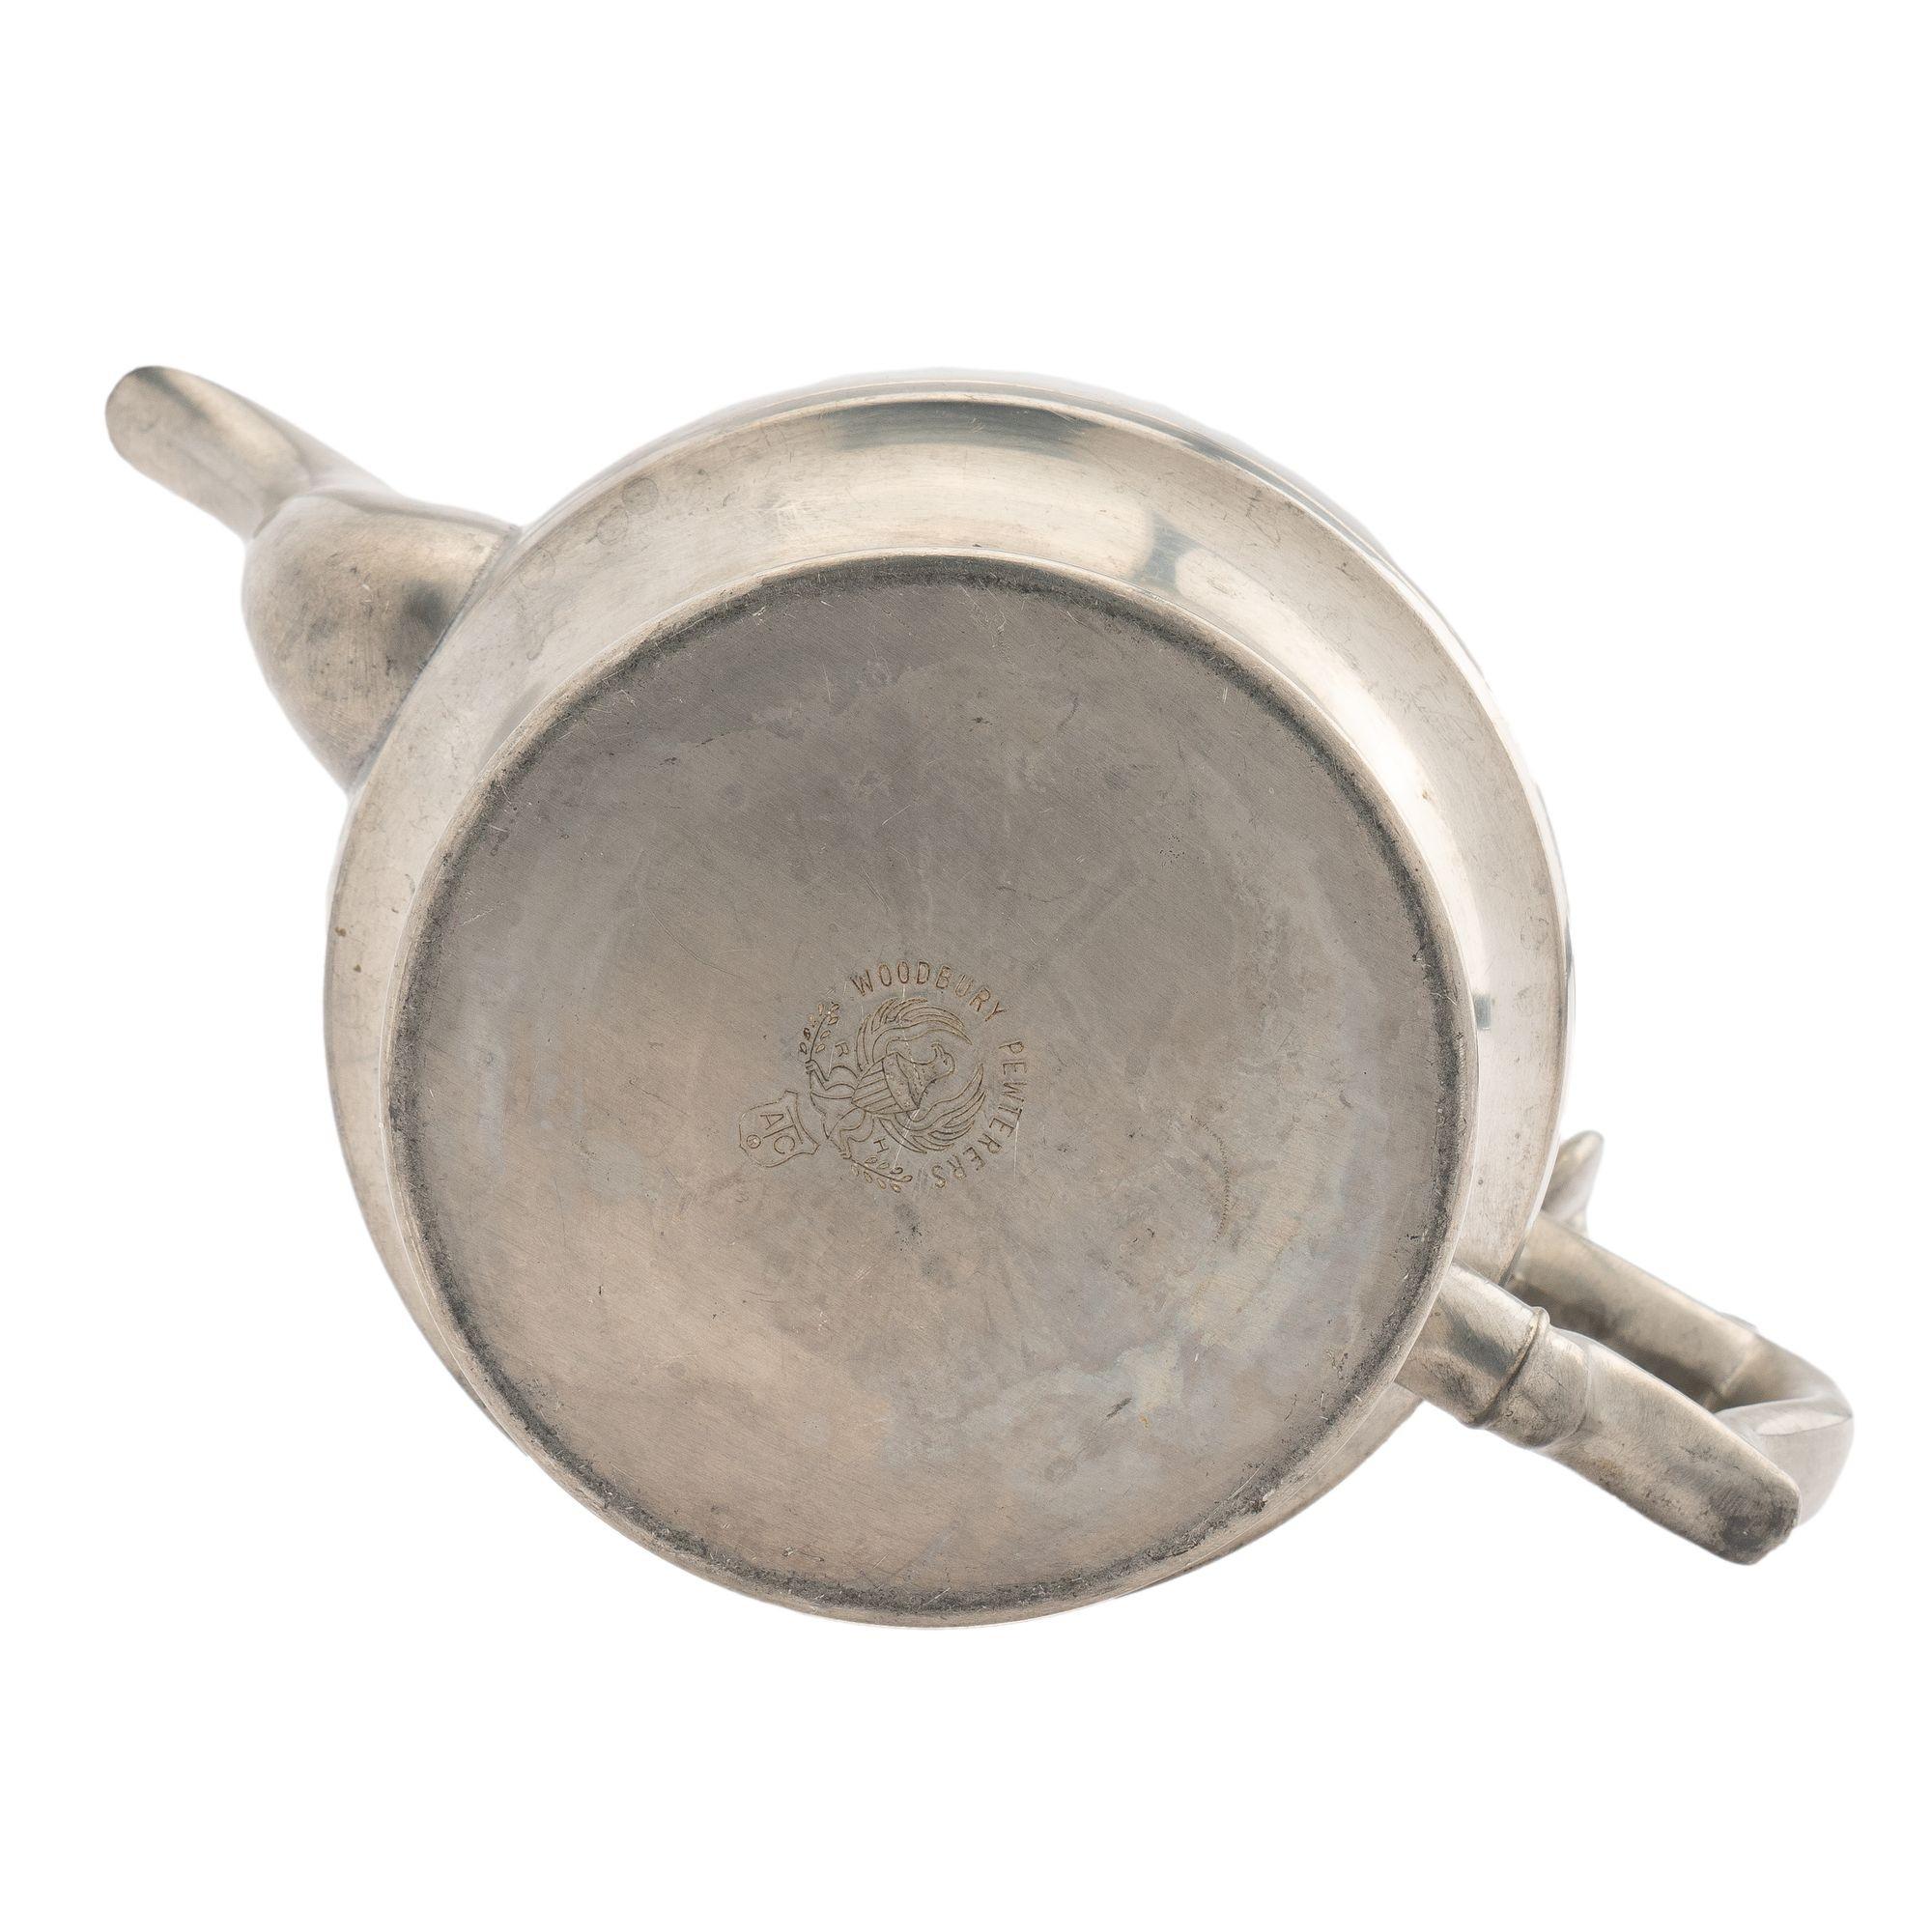 Woodbury Pewter Academic Revival Pewter Holloware Teapot, 1952 For Sale 8